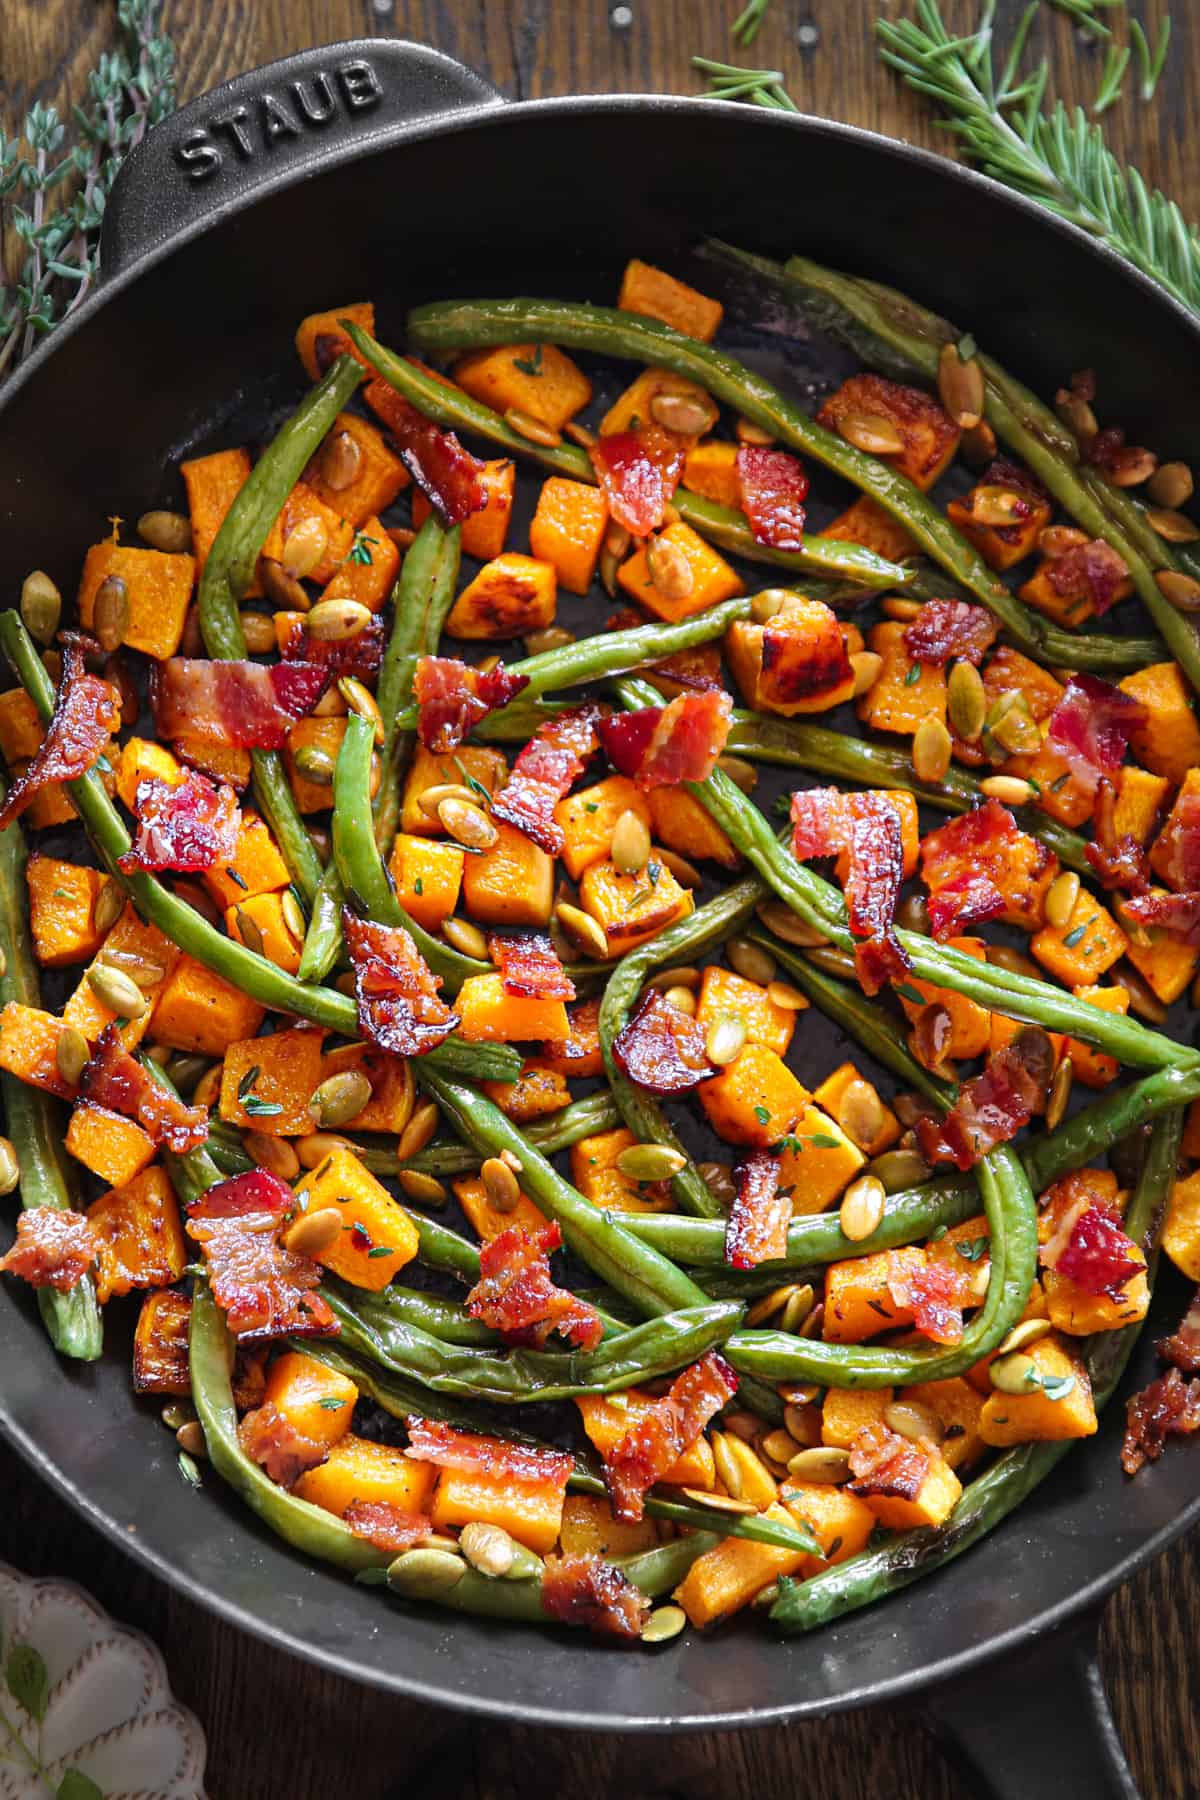 Thanksgiving Roasted Vegetables (Butternut Squash and Green Beans) with Bacon and Pumpkin Seeds in a cast iron skillet.